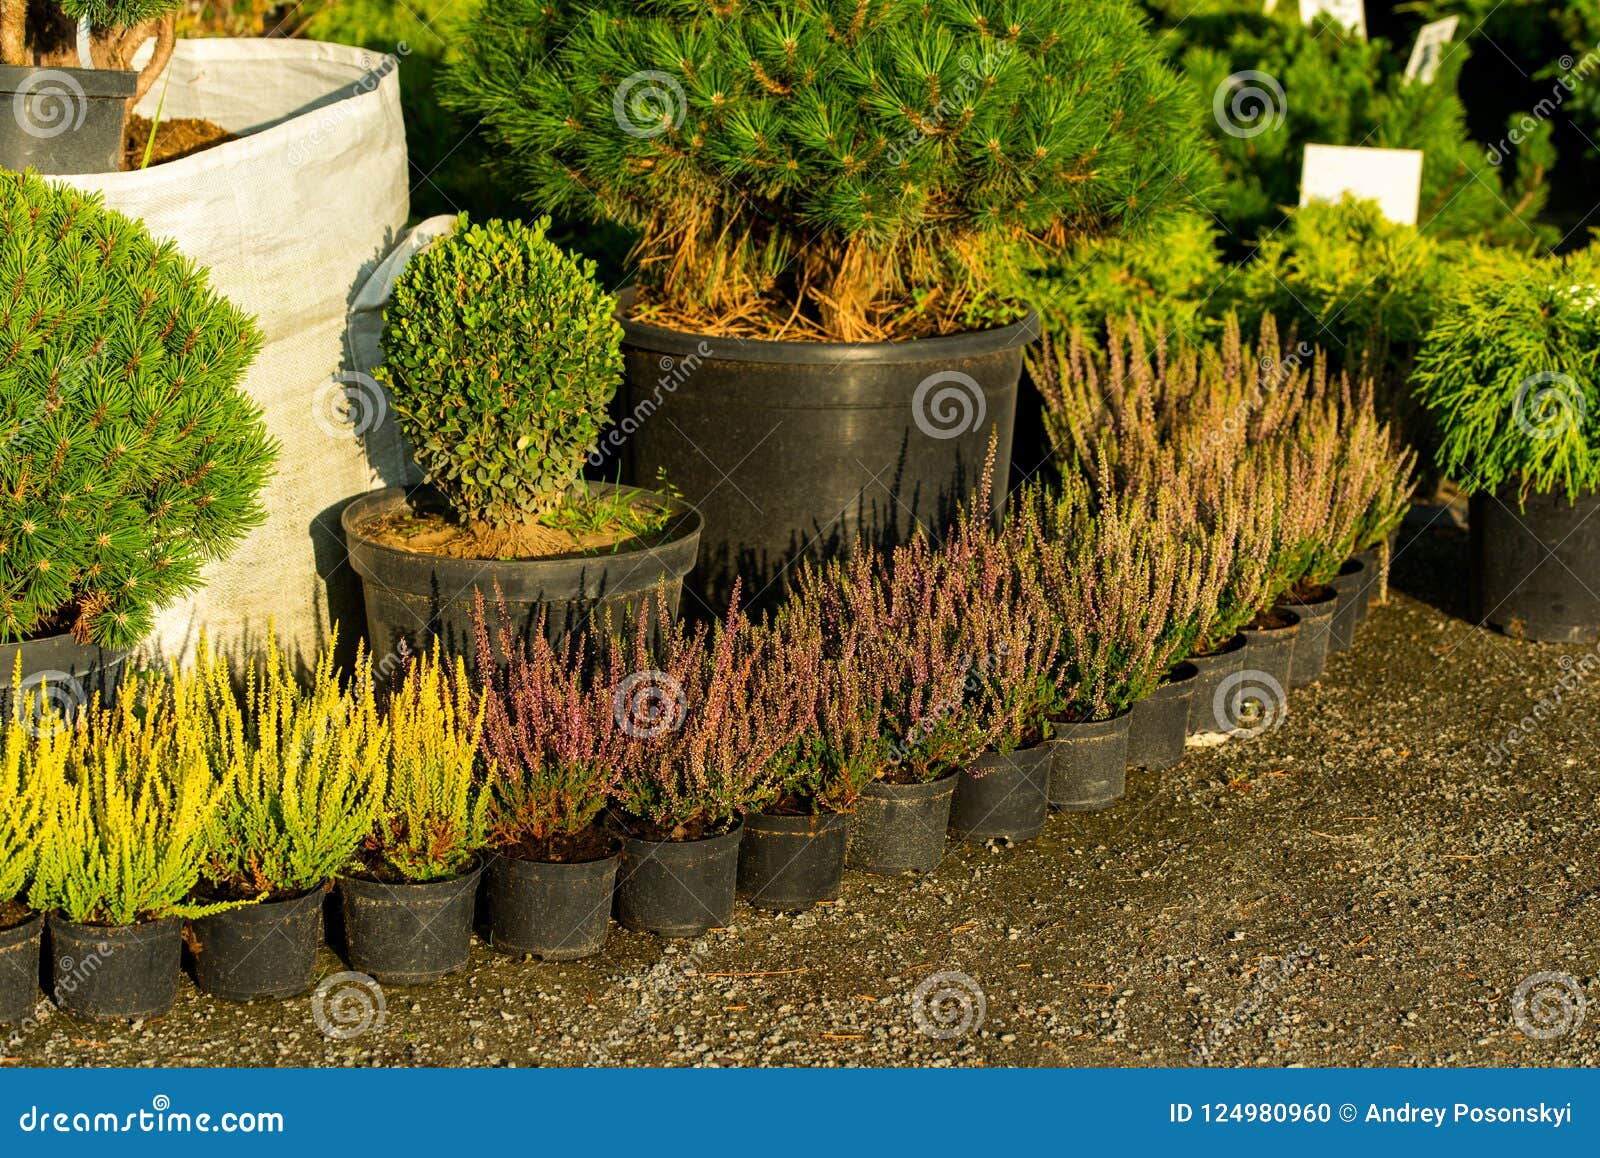 Bushes In Tubs For Sale Stock Photo Image Of Decorative 124980960